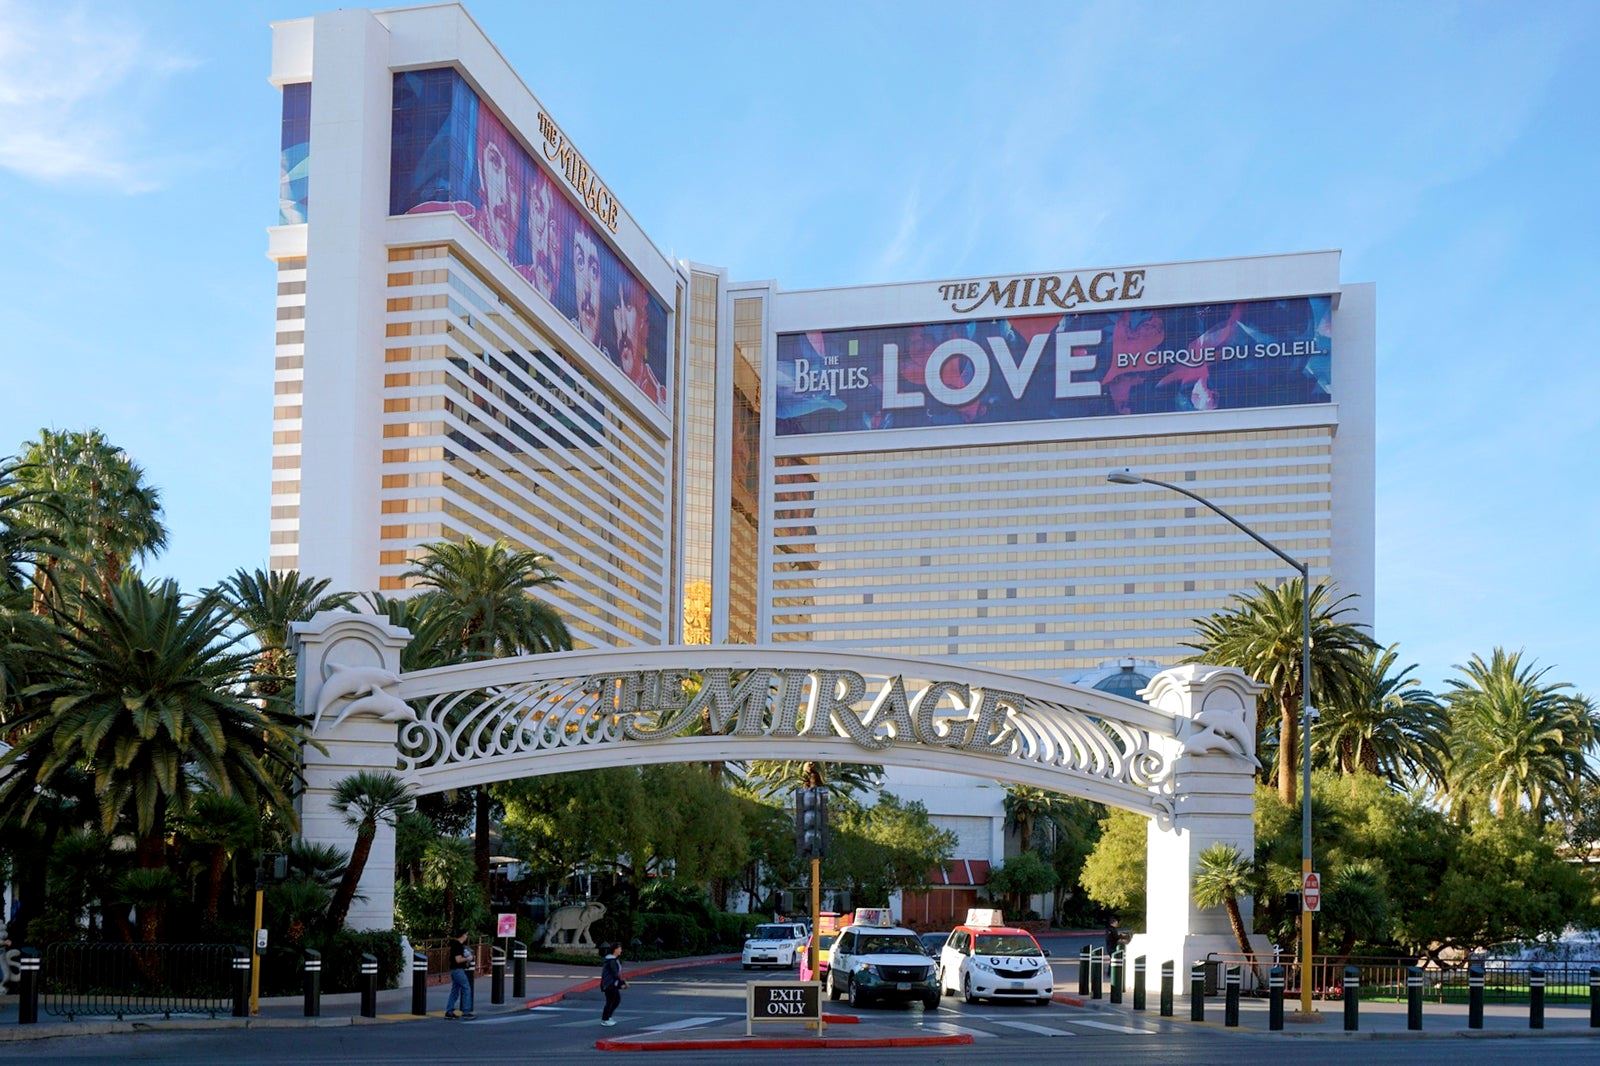 17 Fun Facts About Las Vegas That Will Make You Scratch Your Head